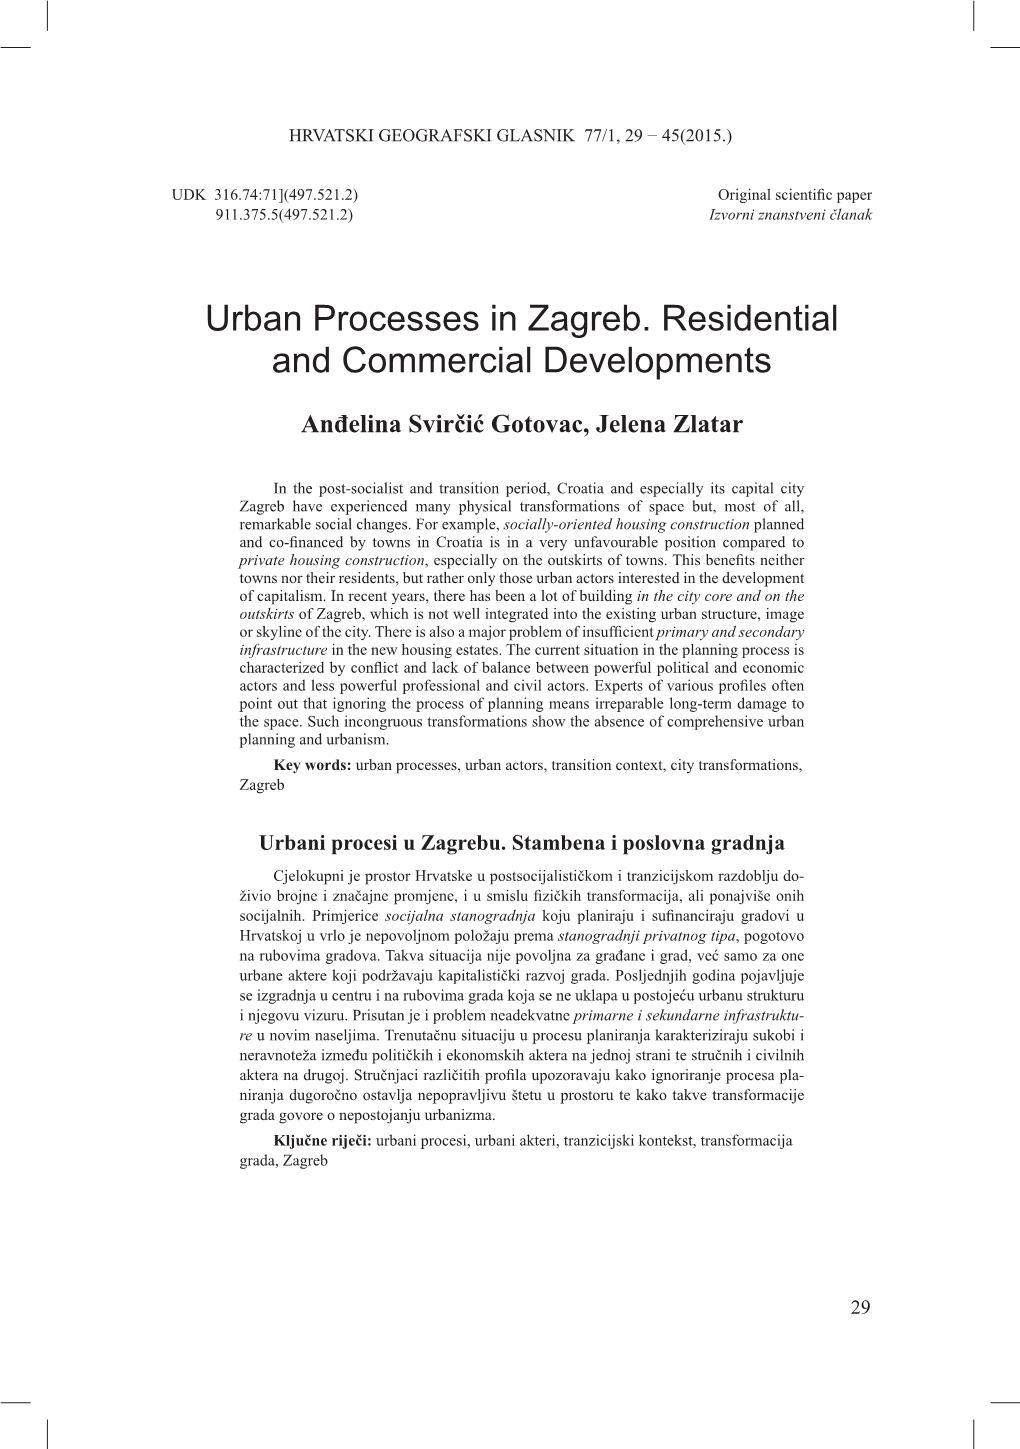 Urban Processes in Zagreb. Residential and Commercial Developments